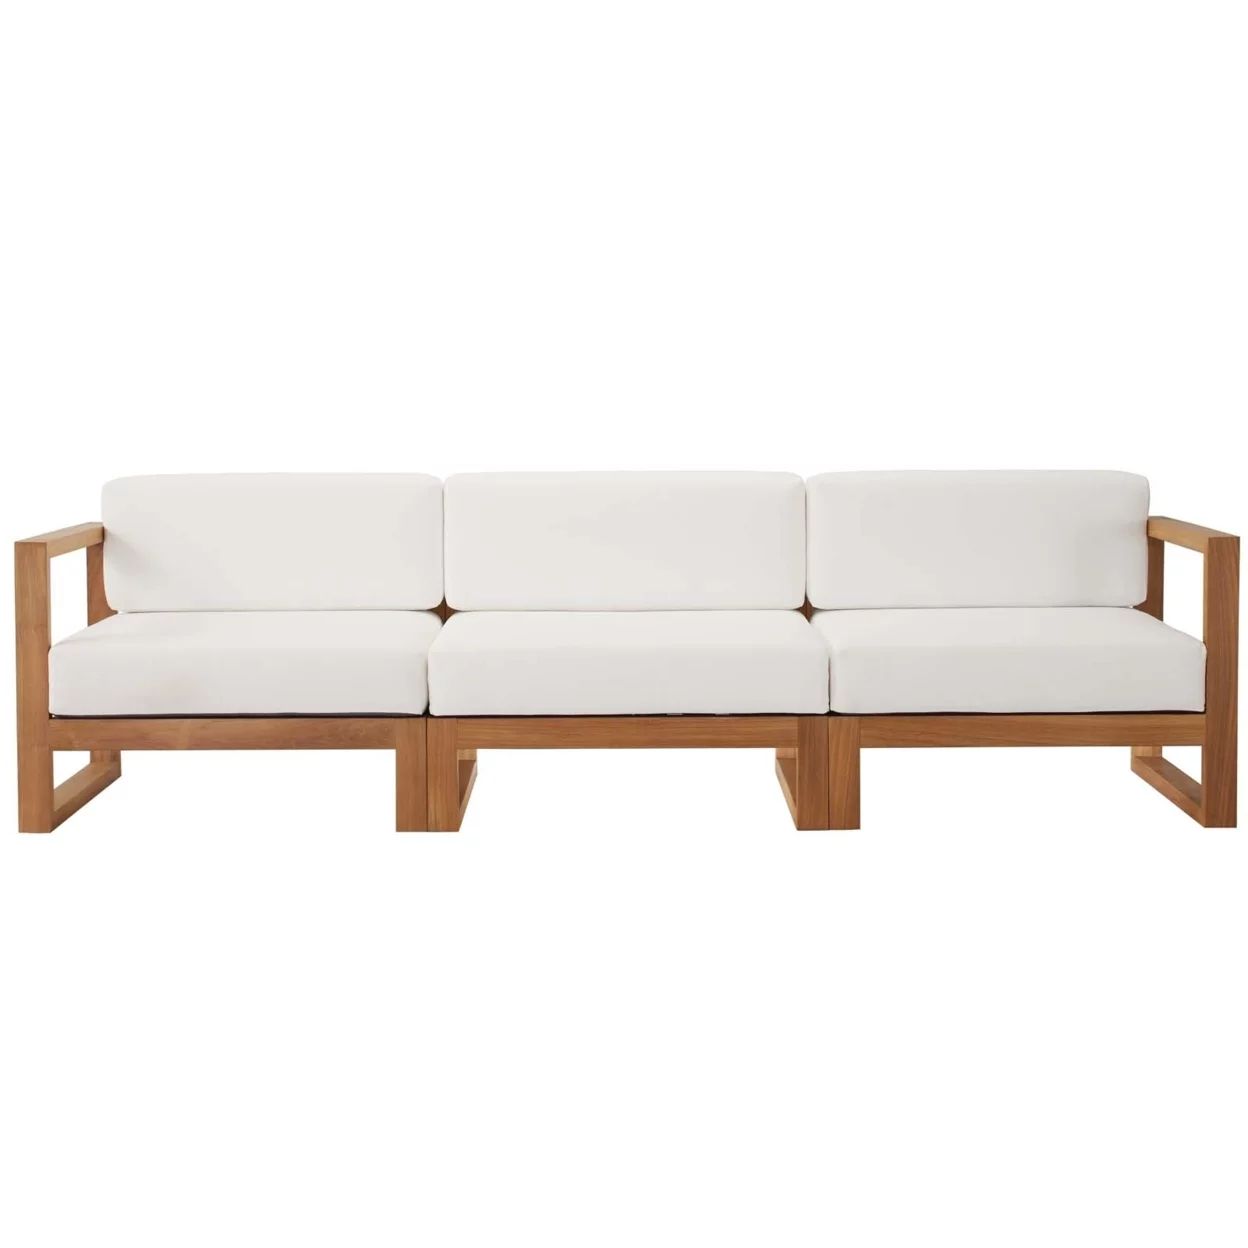 Modway Upland 3-Piece Solid Teak Wood Patio Sectional Sofa in Natural and White | Walmart (US)